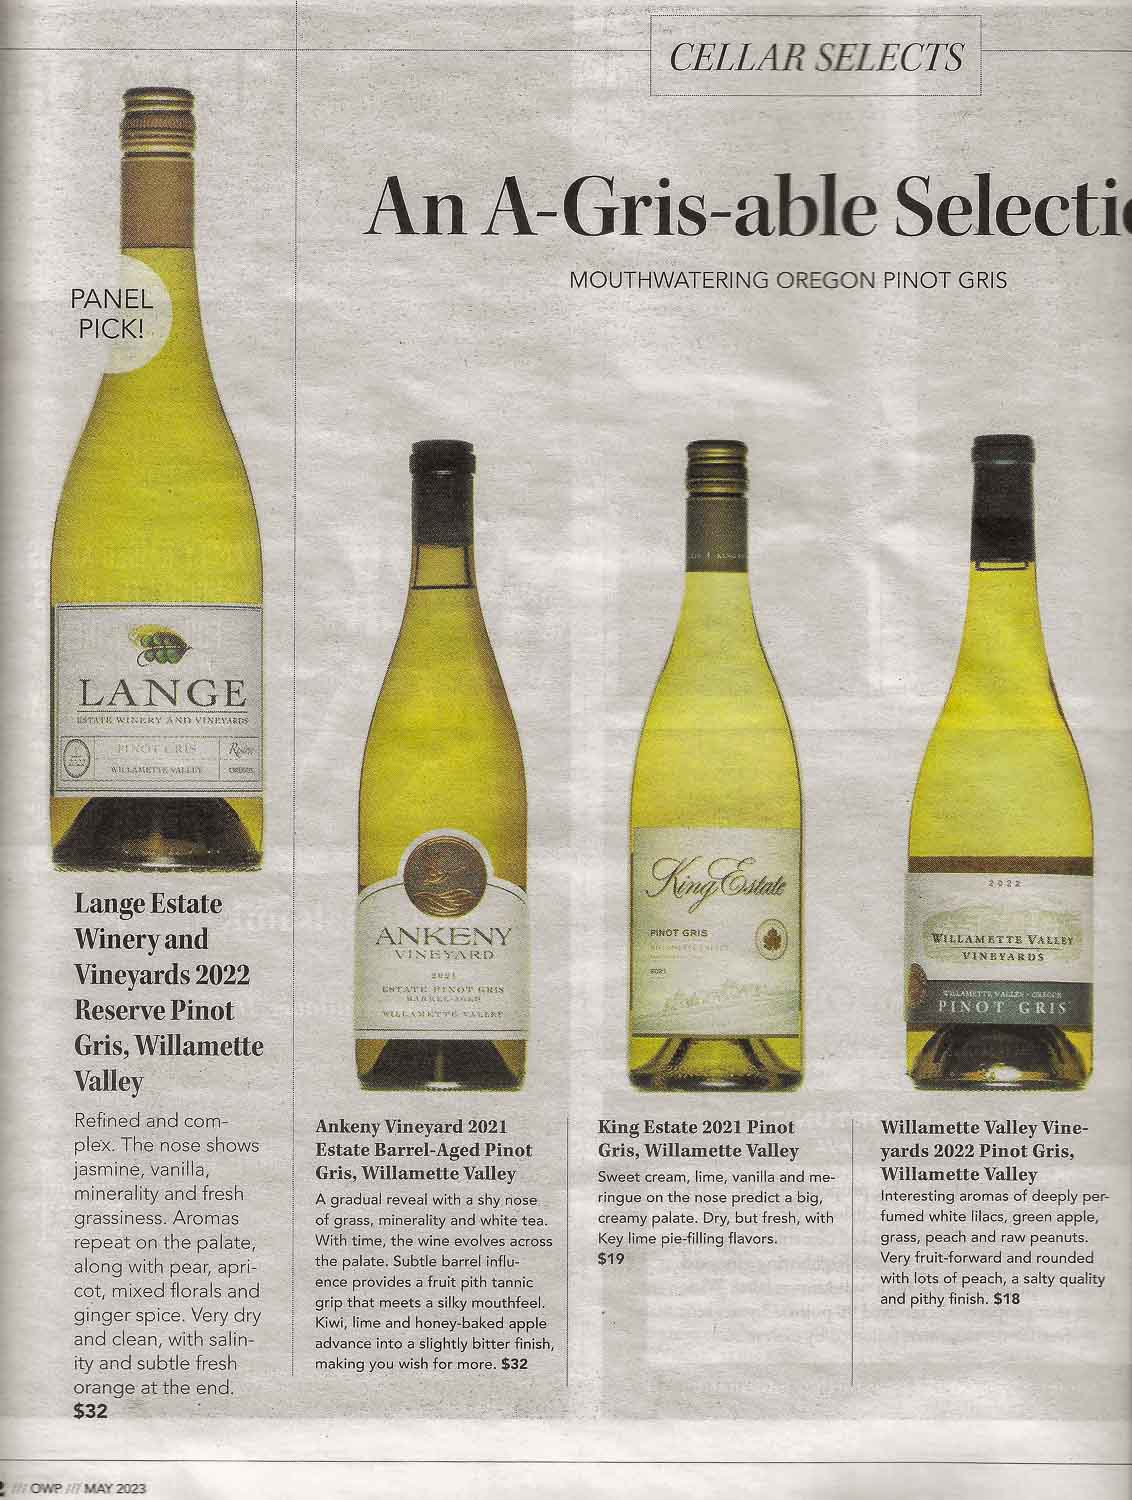 2021 Pinot Gris Featured in the Oregon Wine Press Cellar Selects May 2023